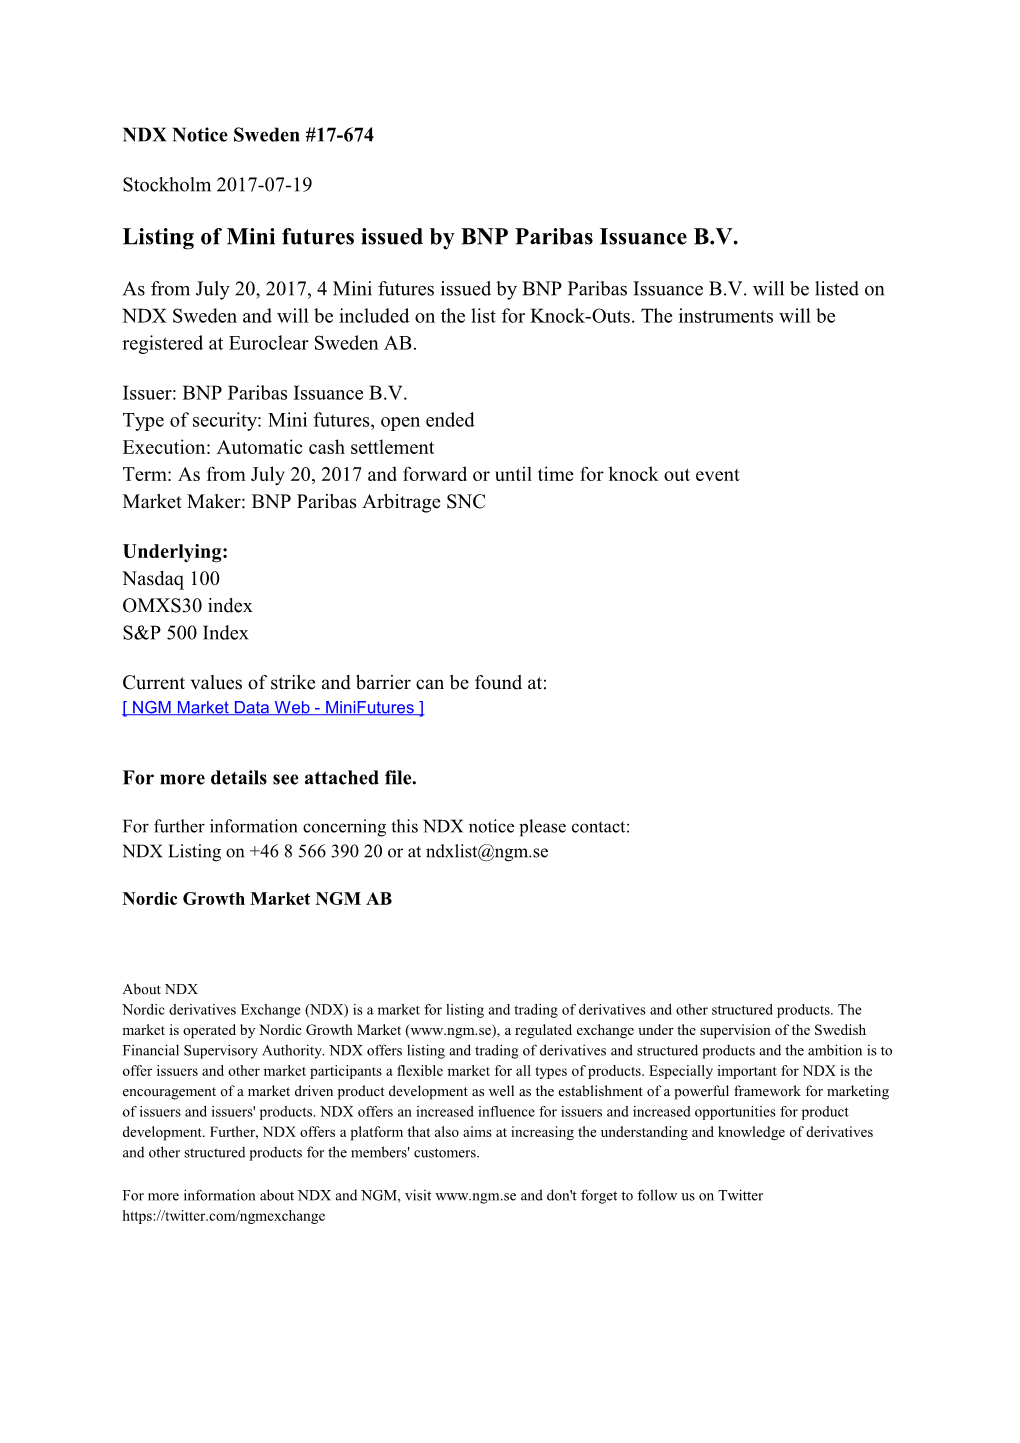 Listing of Mini Futures Issued by BNP Paribas Issuance B.V